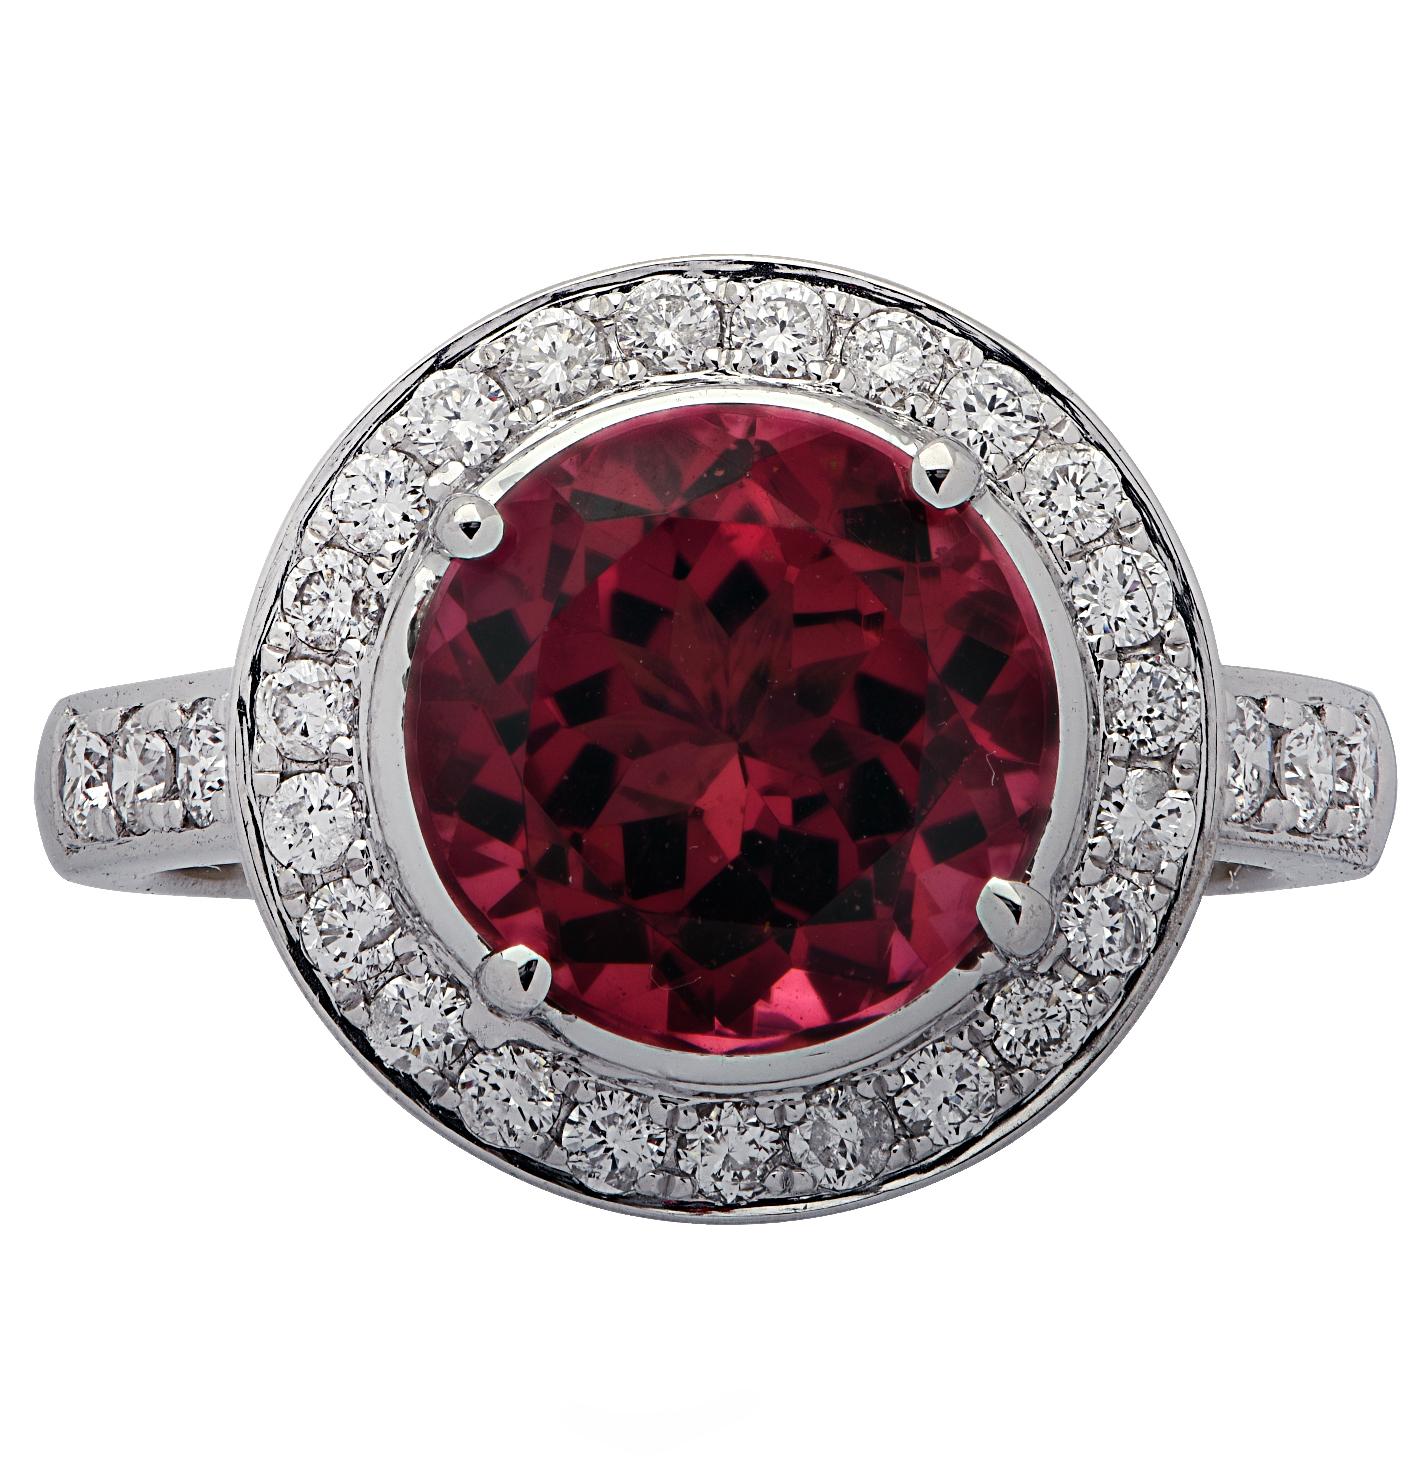 Stunning engagement ring crafted in 18 karat white gold, showcasing a round Rubellite Tourmaline weighing approximately 2.93 carats adorned with round brilliant cut diamonds weighing approximately .47carats total, G color, VS clarity. The face of